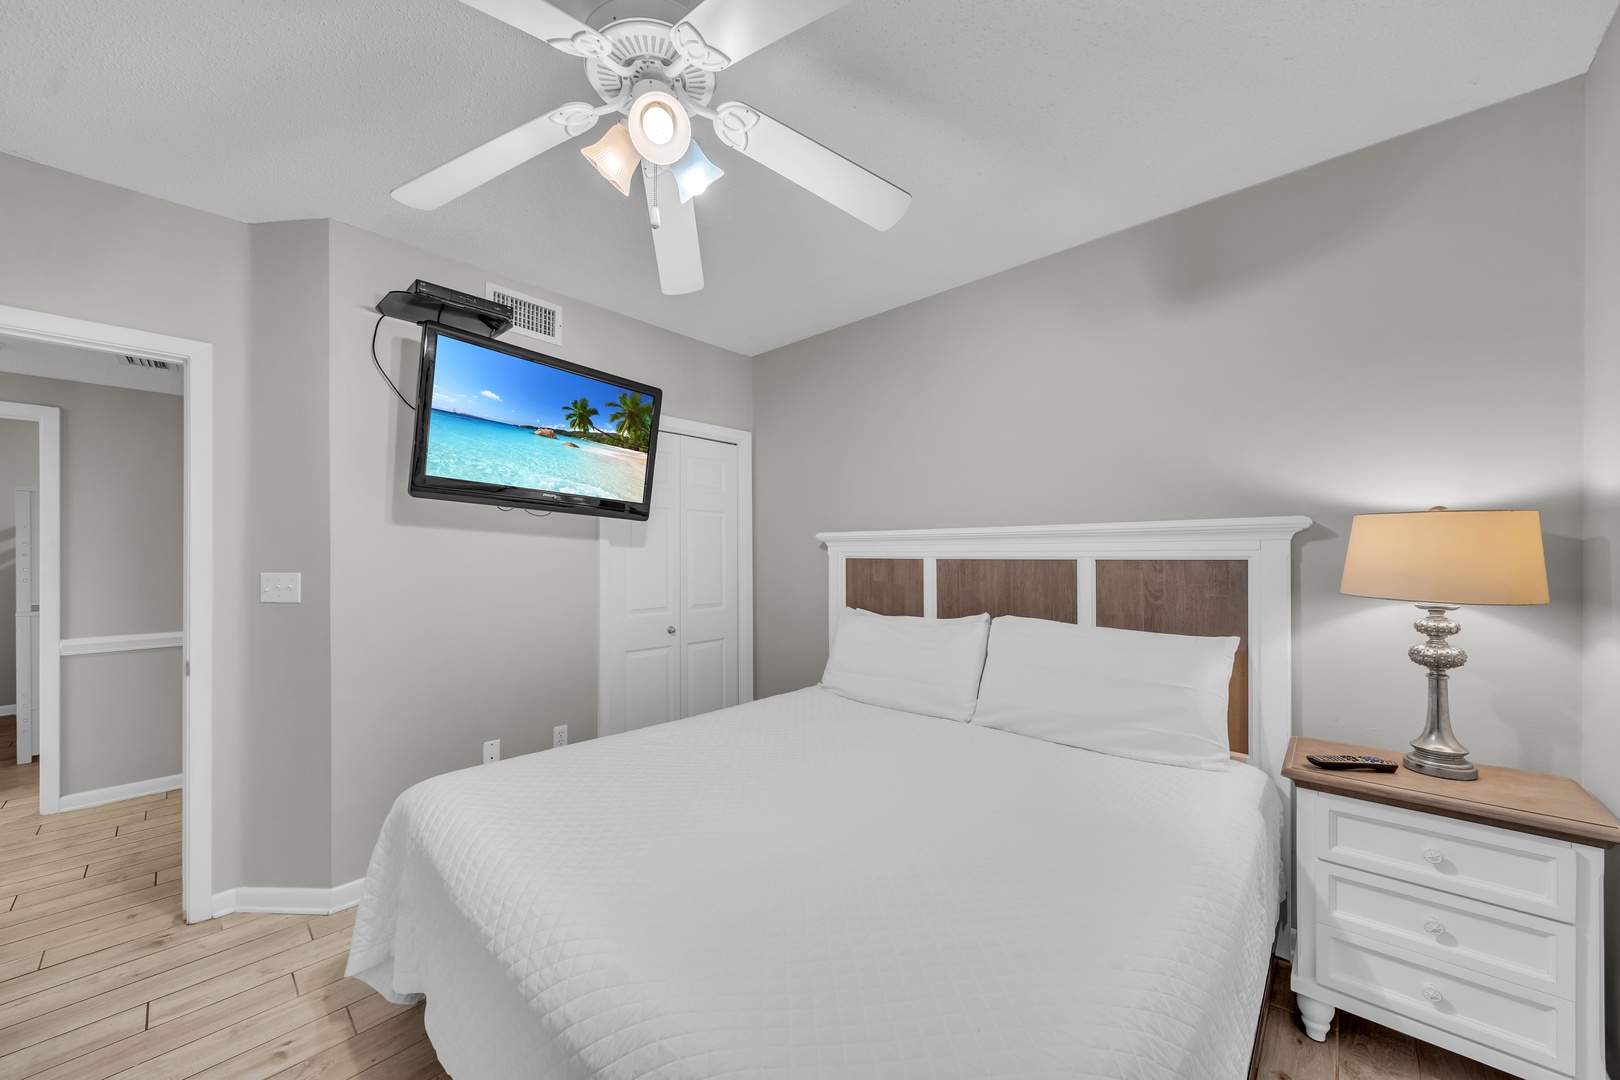 The first Guest Bedroom has a Large Flat-Screen HD TV, and a DVD player.